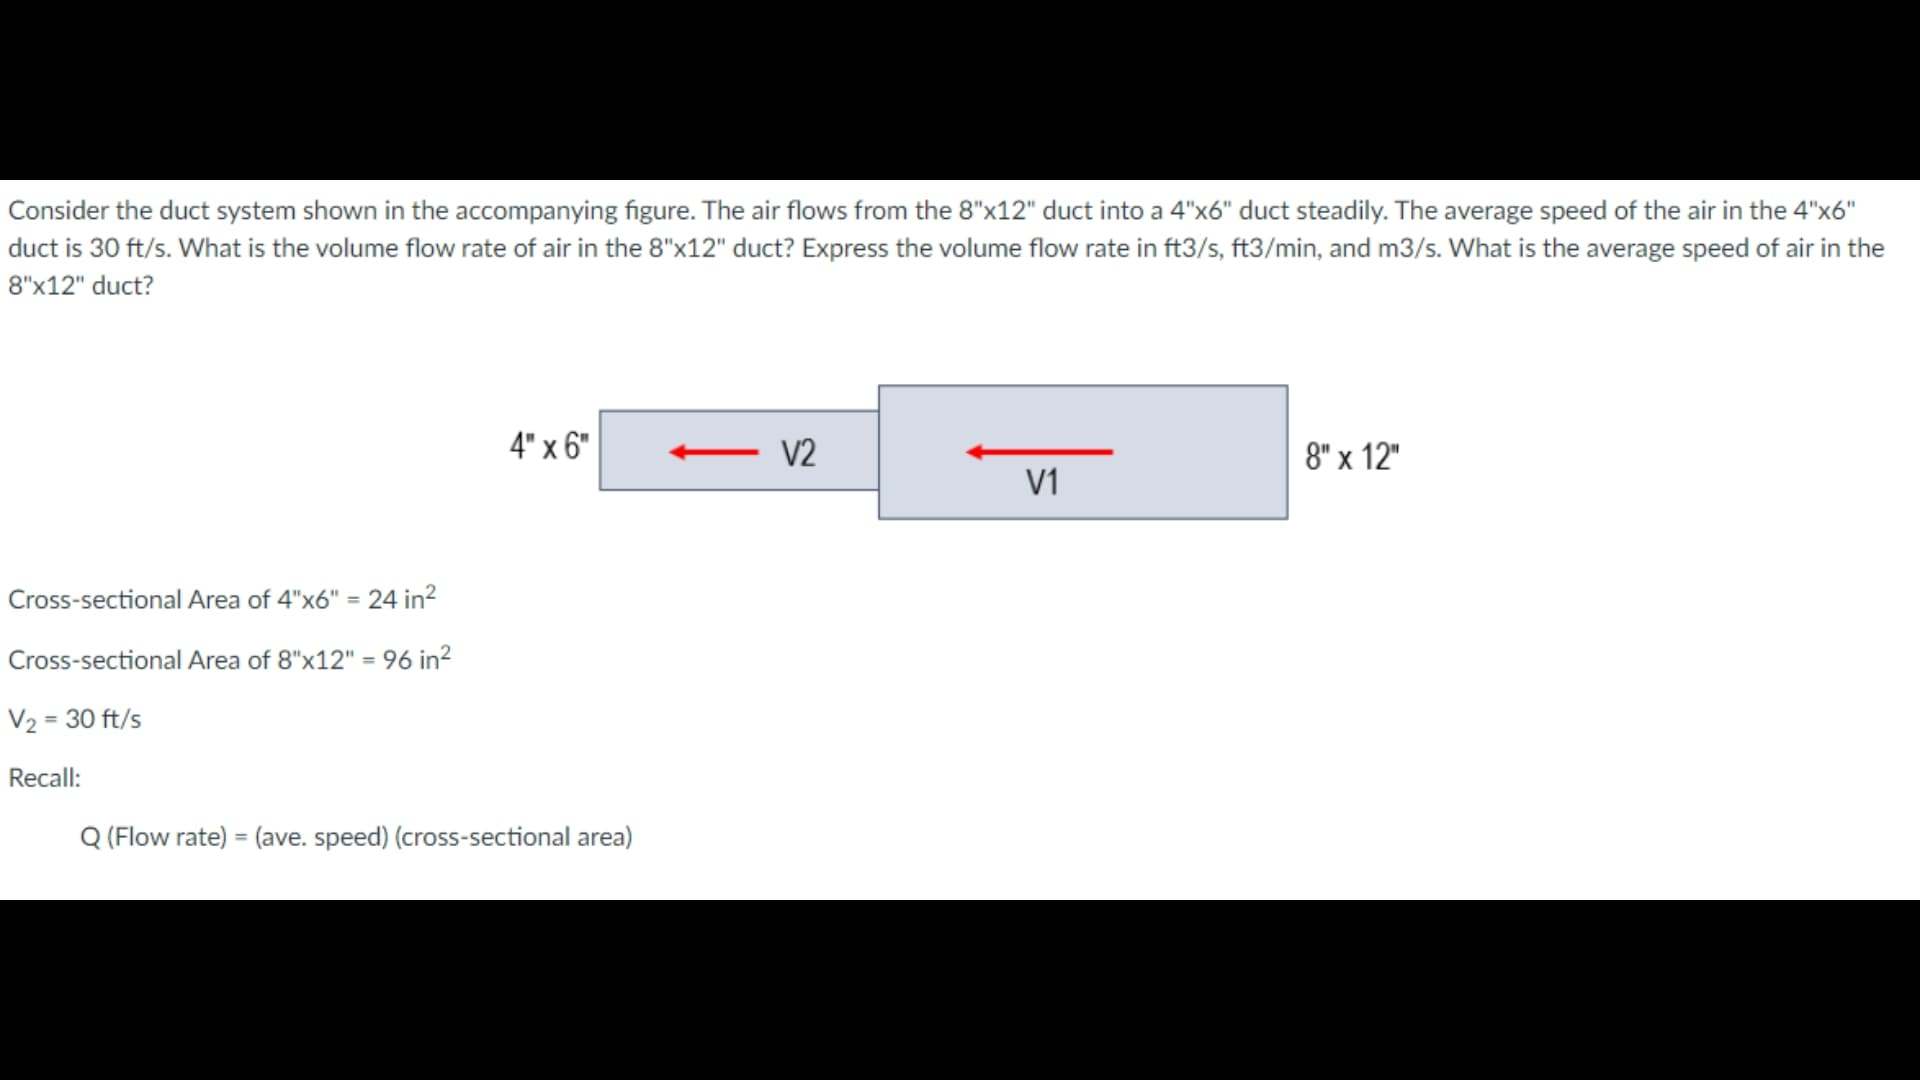 Consider the duct system shown in the accompanying figure. The air flows from the 8"x12" duct into a 4"x6" duct steadily. The average speed of the air in the 4"x6"
duct is 30 ft/s. What is the volume flow rate of air in the 8"x12" duct? Express the volume flow rate in ft3/s, ft3/min, and m3/s. What is the average speed of air in the
8"x12" duct?
4" x 6"
V2
8" x 12"
V1
Cross-sectional Area of 4"x6" = 24 in?
%3D
Cross-sectional Area of 8"x12" = 96 in?
%3D
V2 = 30 ft/s
Recall:
Q (Flow rate) = (ave. speed) (cross-sectional area)
